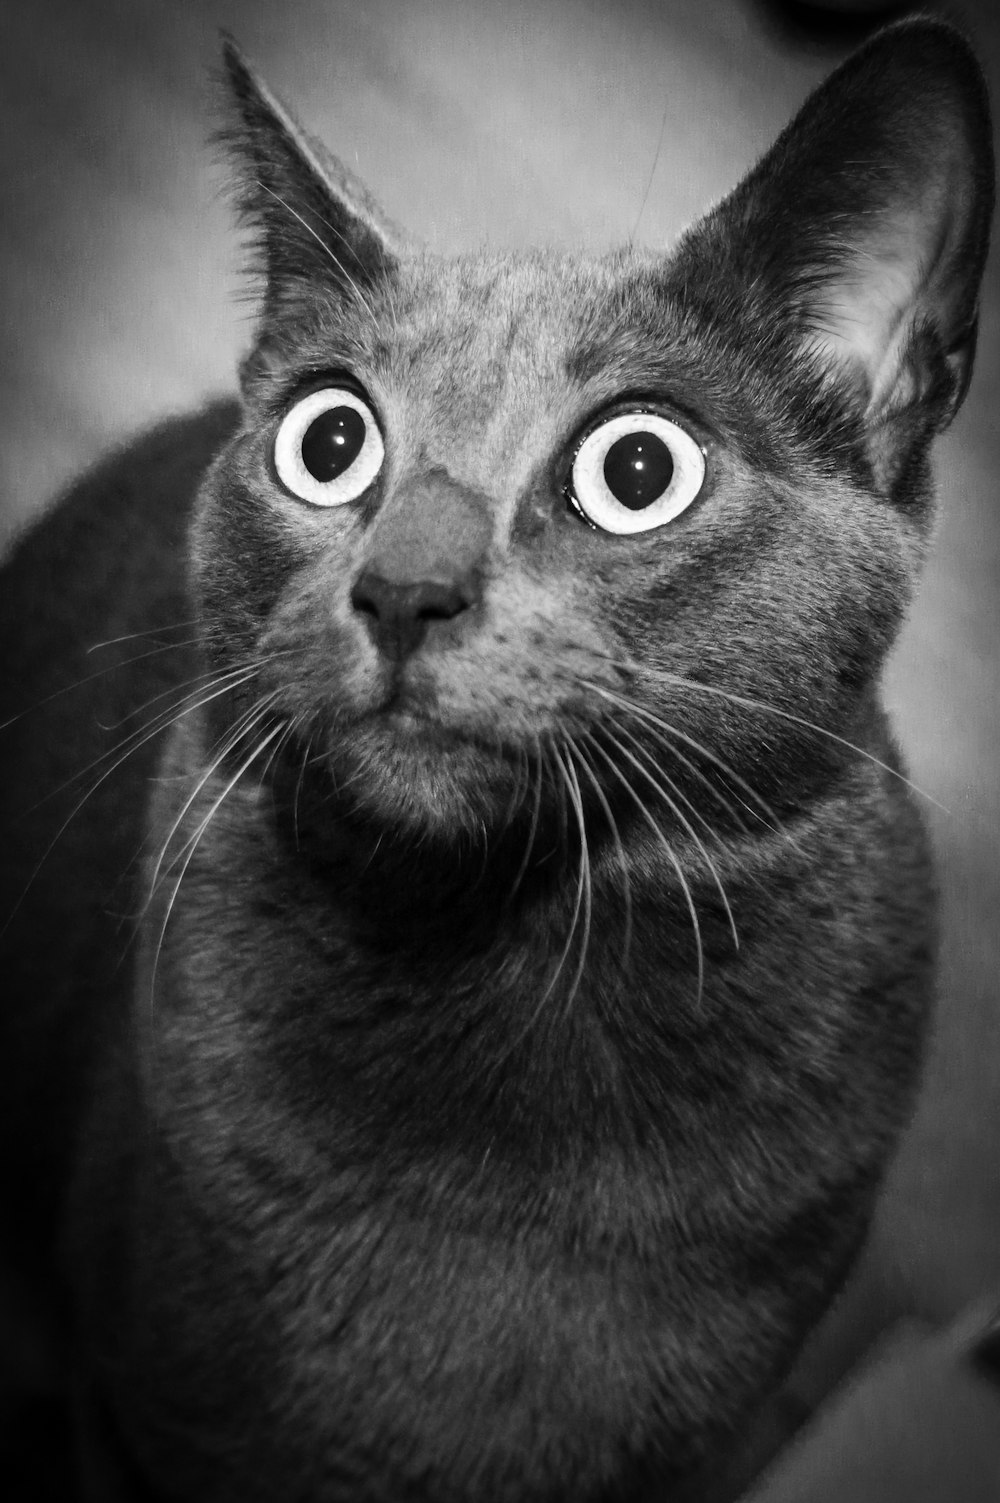 a black and white photo of a cat with big eyes